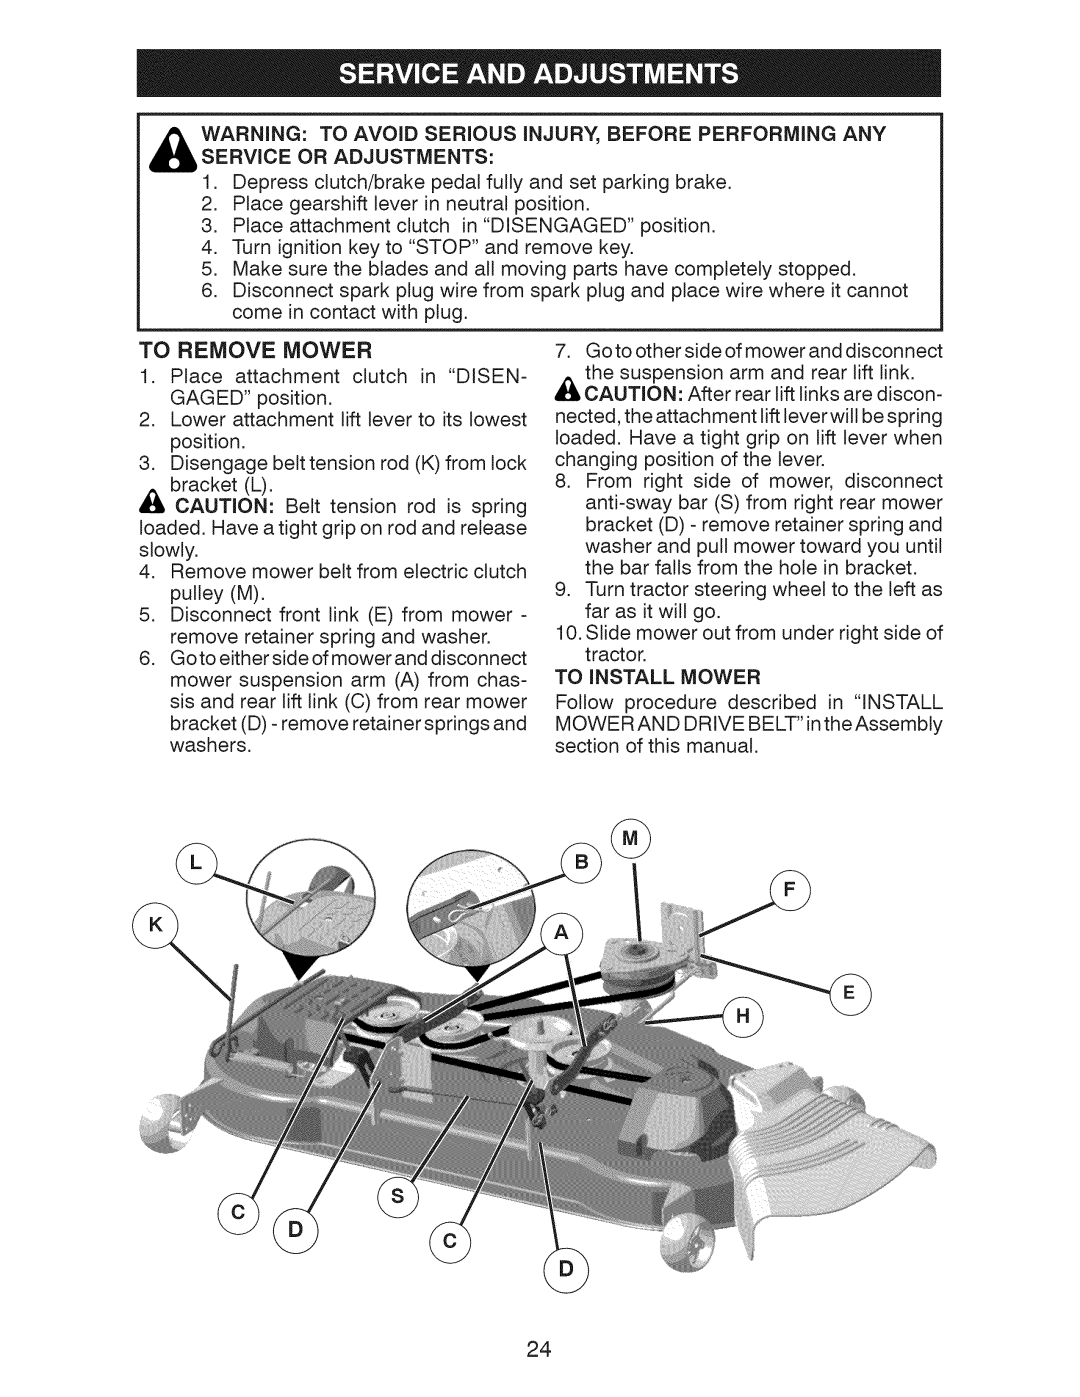 Craftsman 917.28955 owner manual To Remove Mower, To Install Mower 